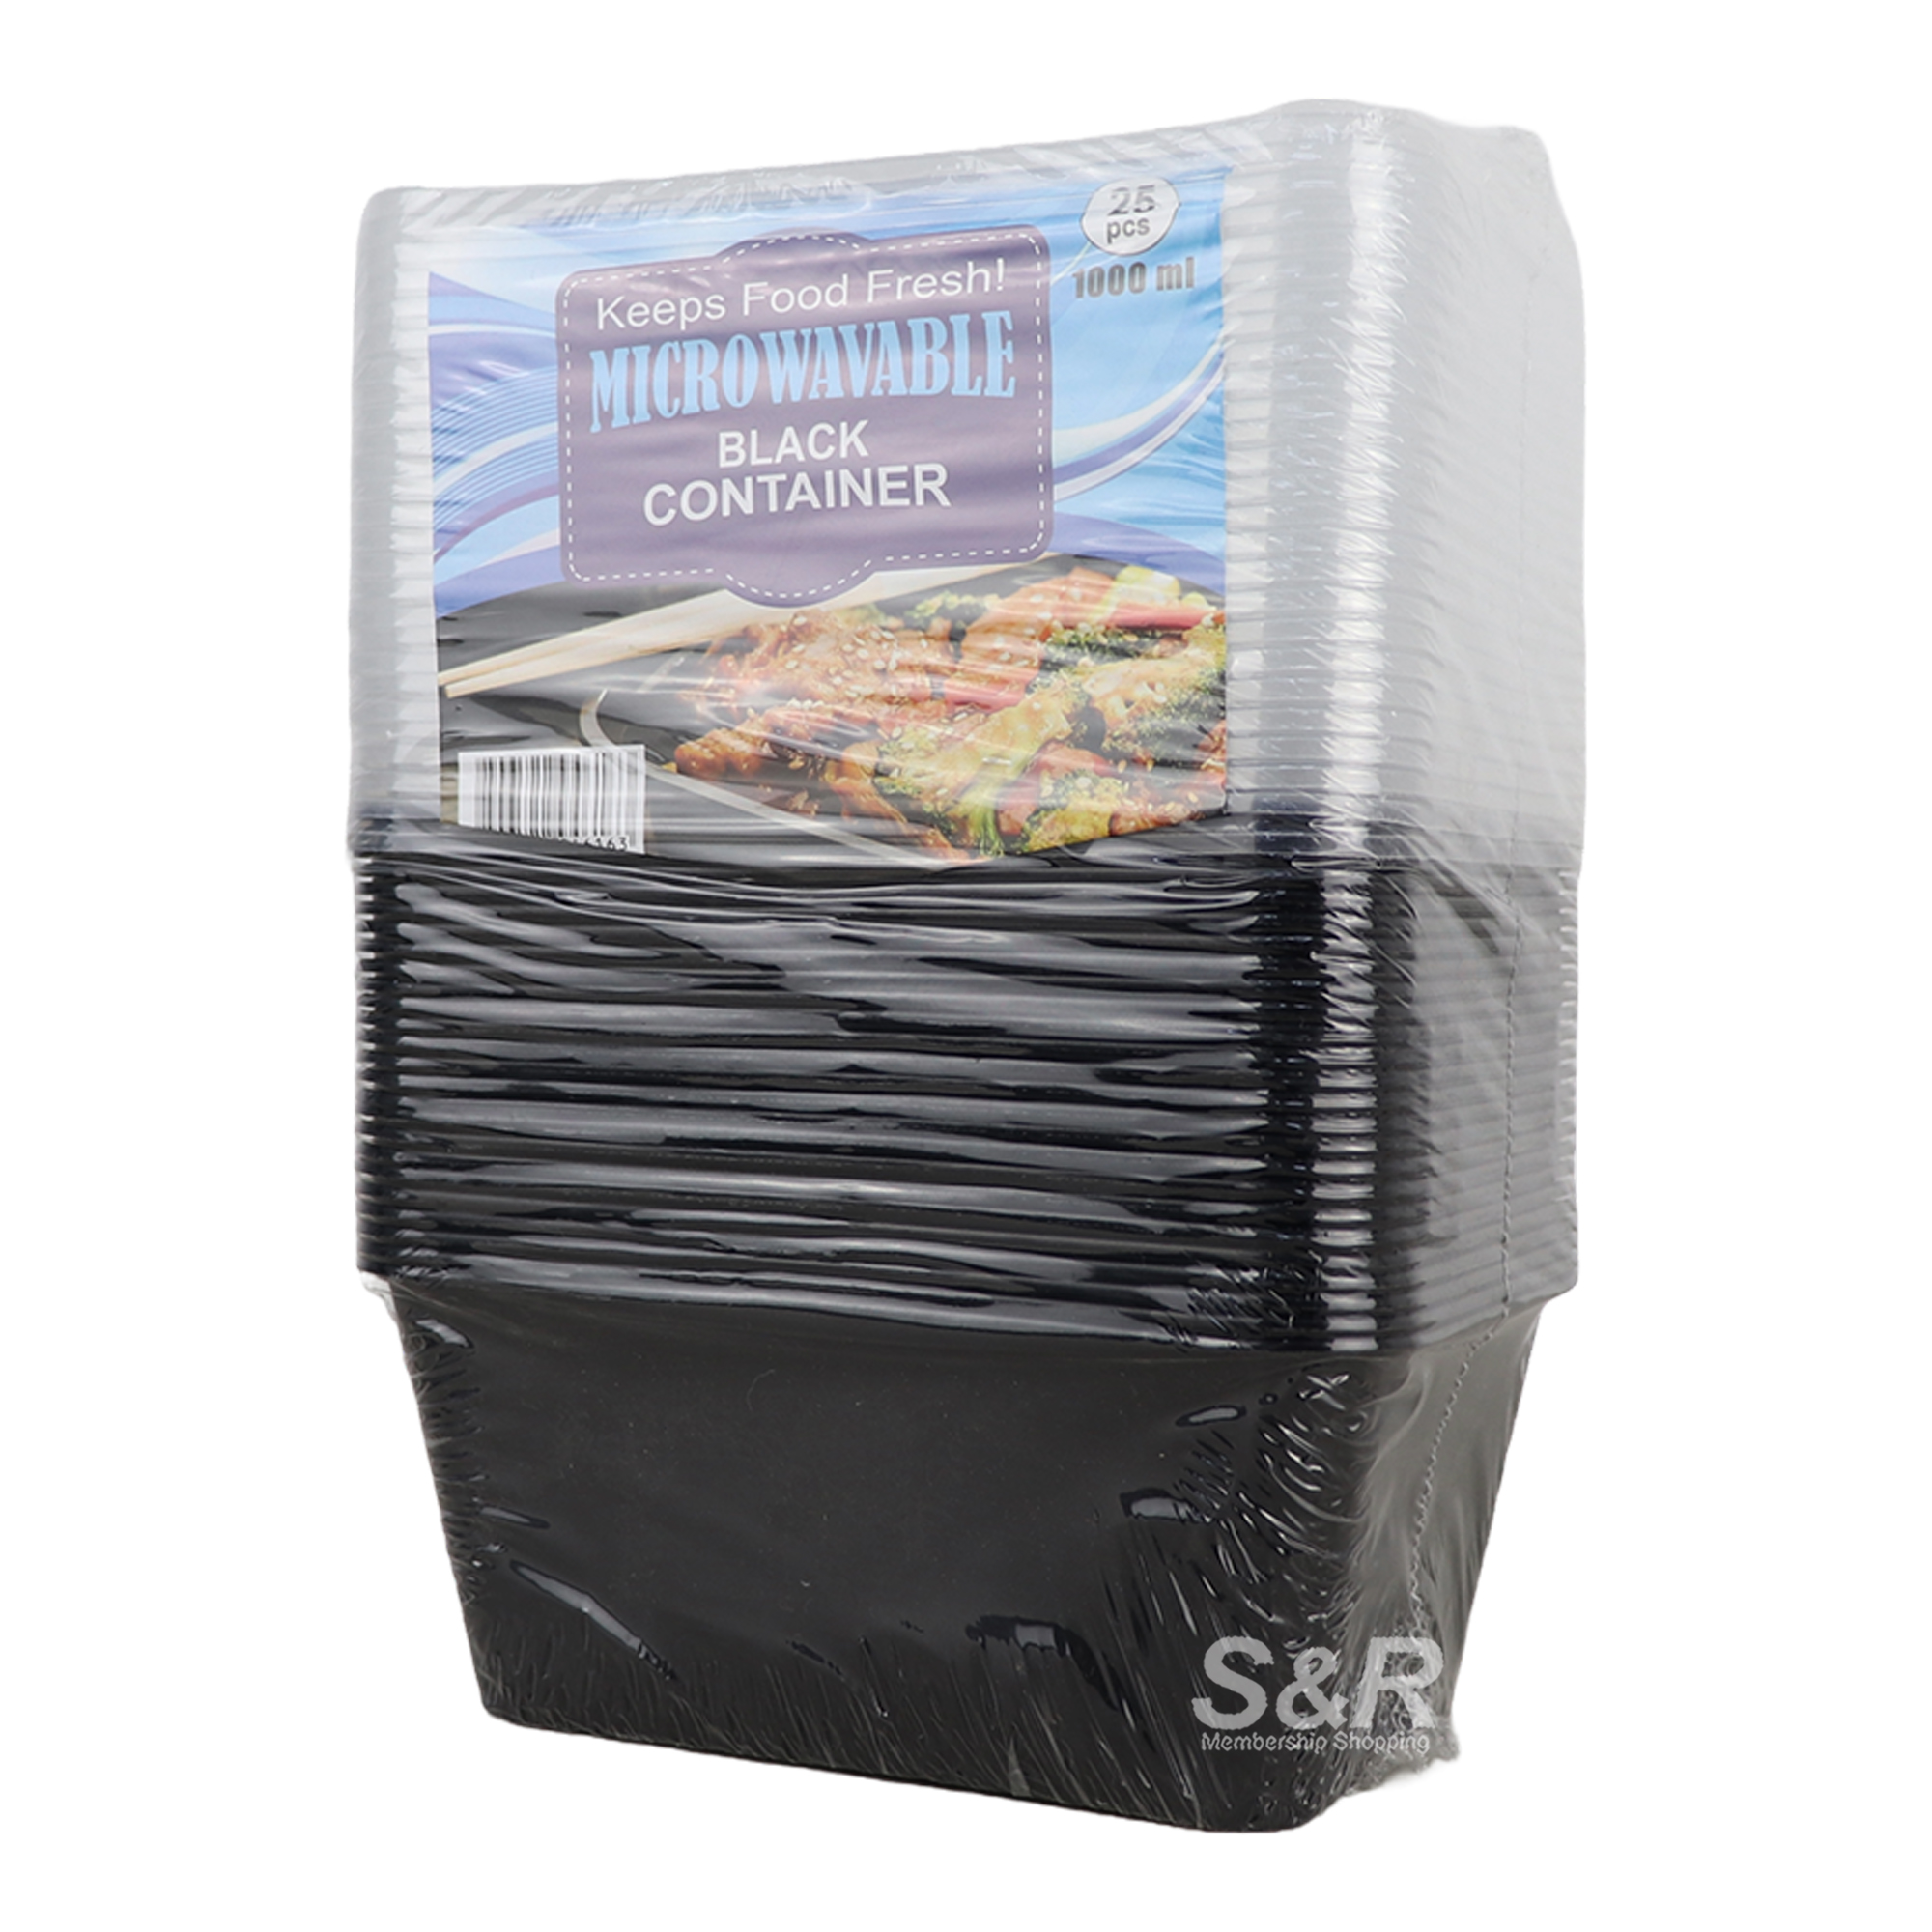 Carnival Microwavable Black Food Container 25pcs x 1L